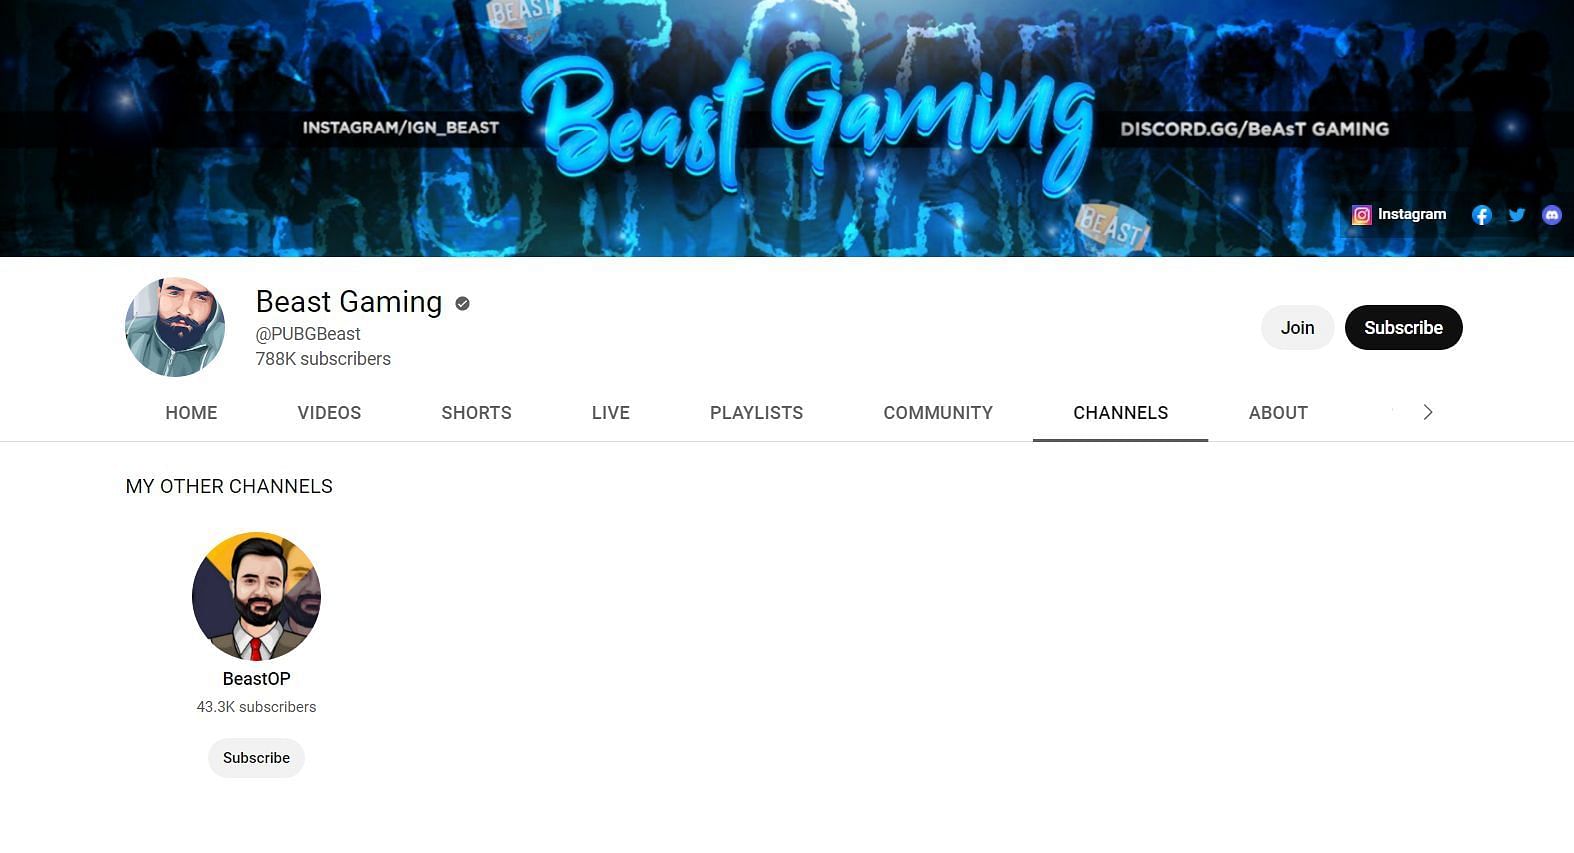 Lovish &quot;Beast Gaming&quot; Kharb&#039;s YouTube channels and earnings (Image via Google)